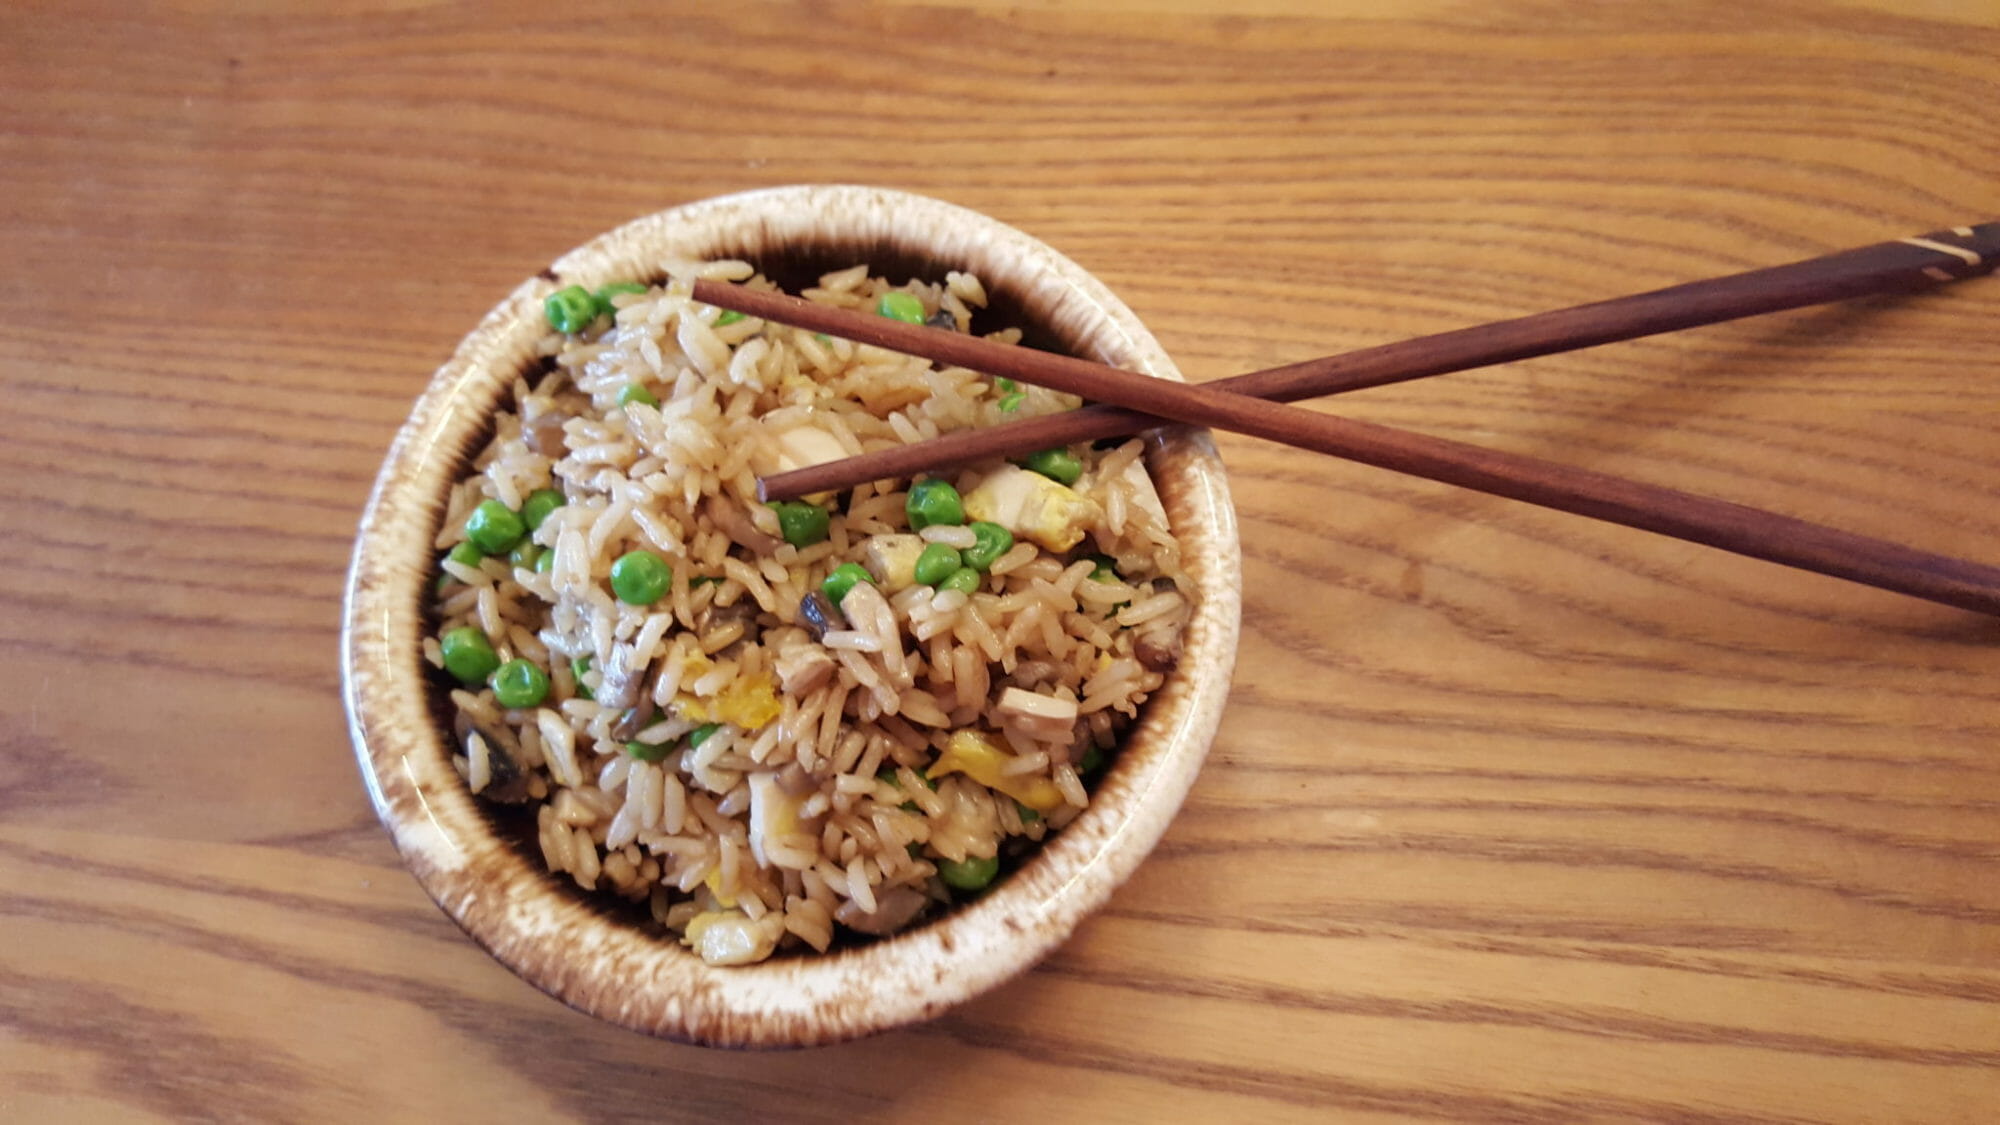 A brown bowl filled with fried rice and vegetables, next to a set of brown chopsticks.